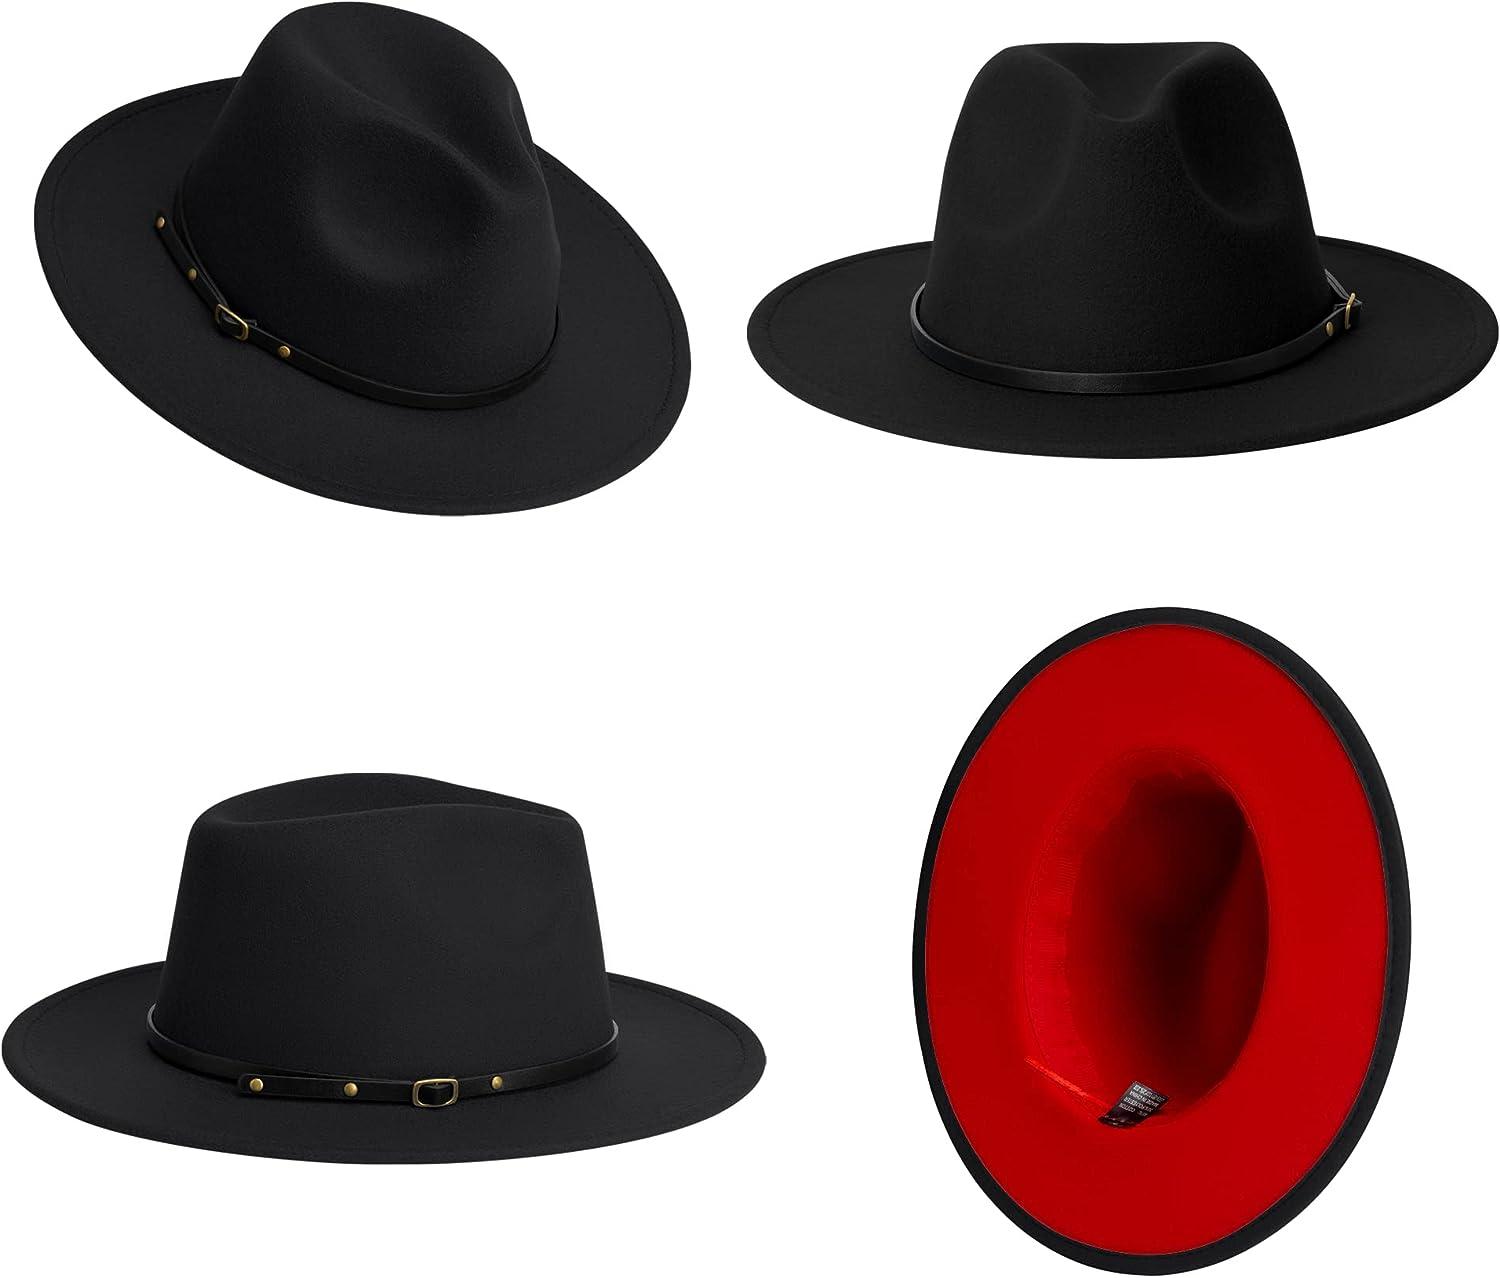 Funtery 4 Pcs Wide Brim Hats for Men Women Two Tone Adjustable Dress Hats  with Brim Panama Hat with Buckle